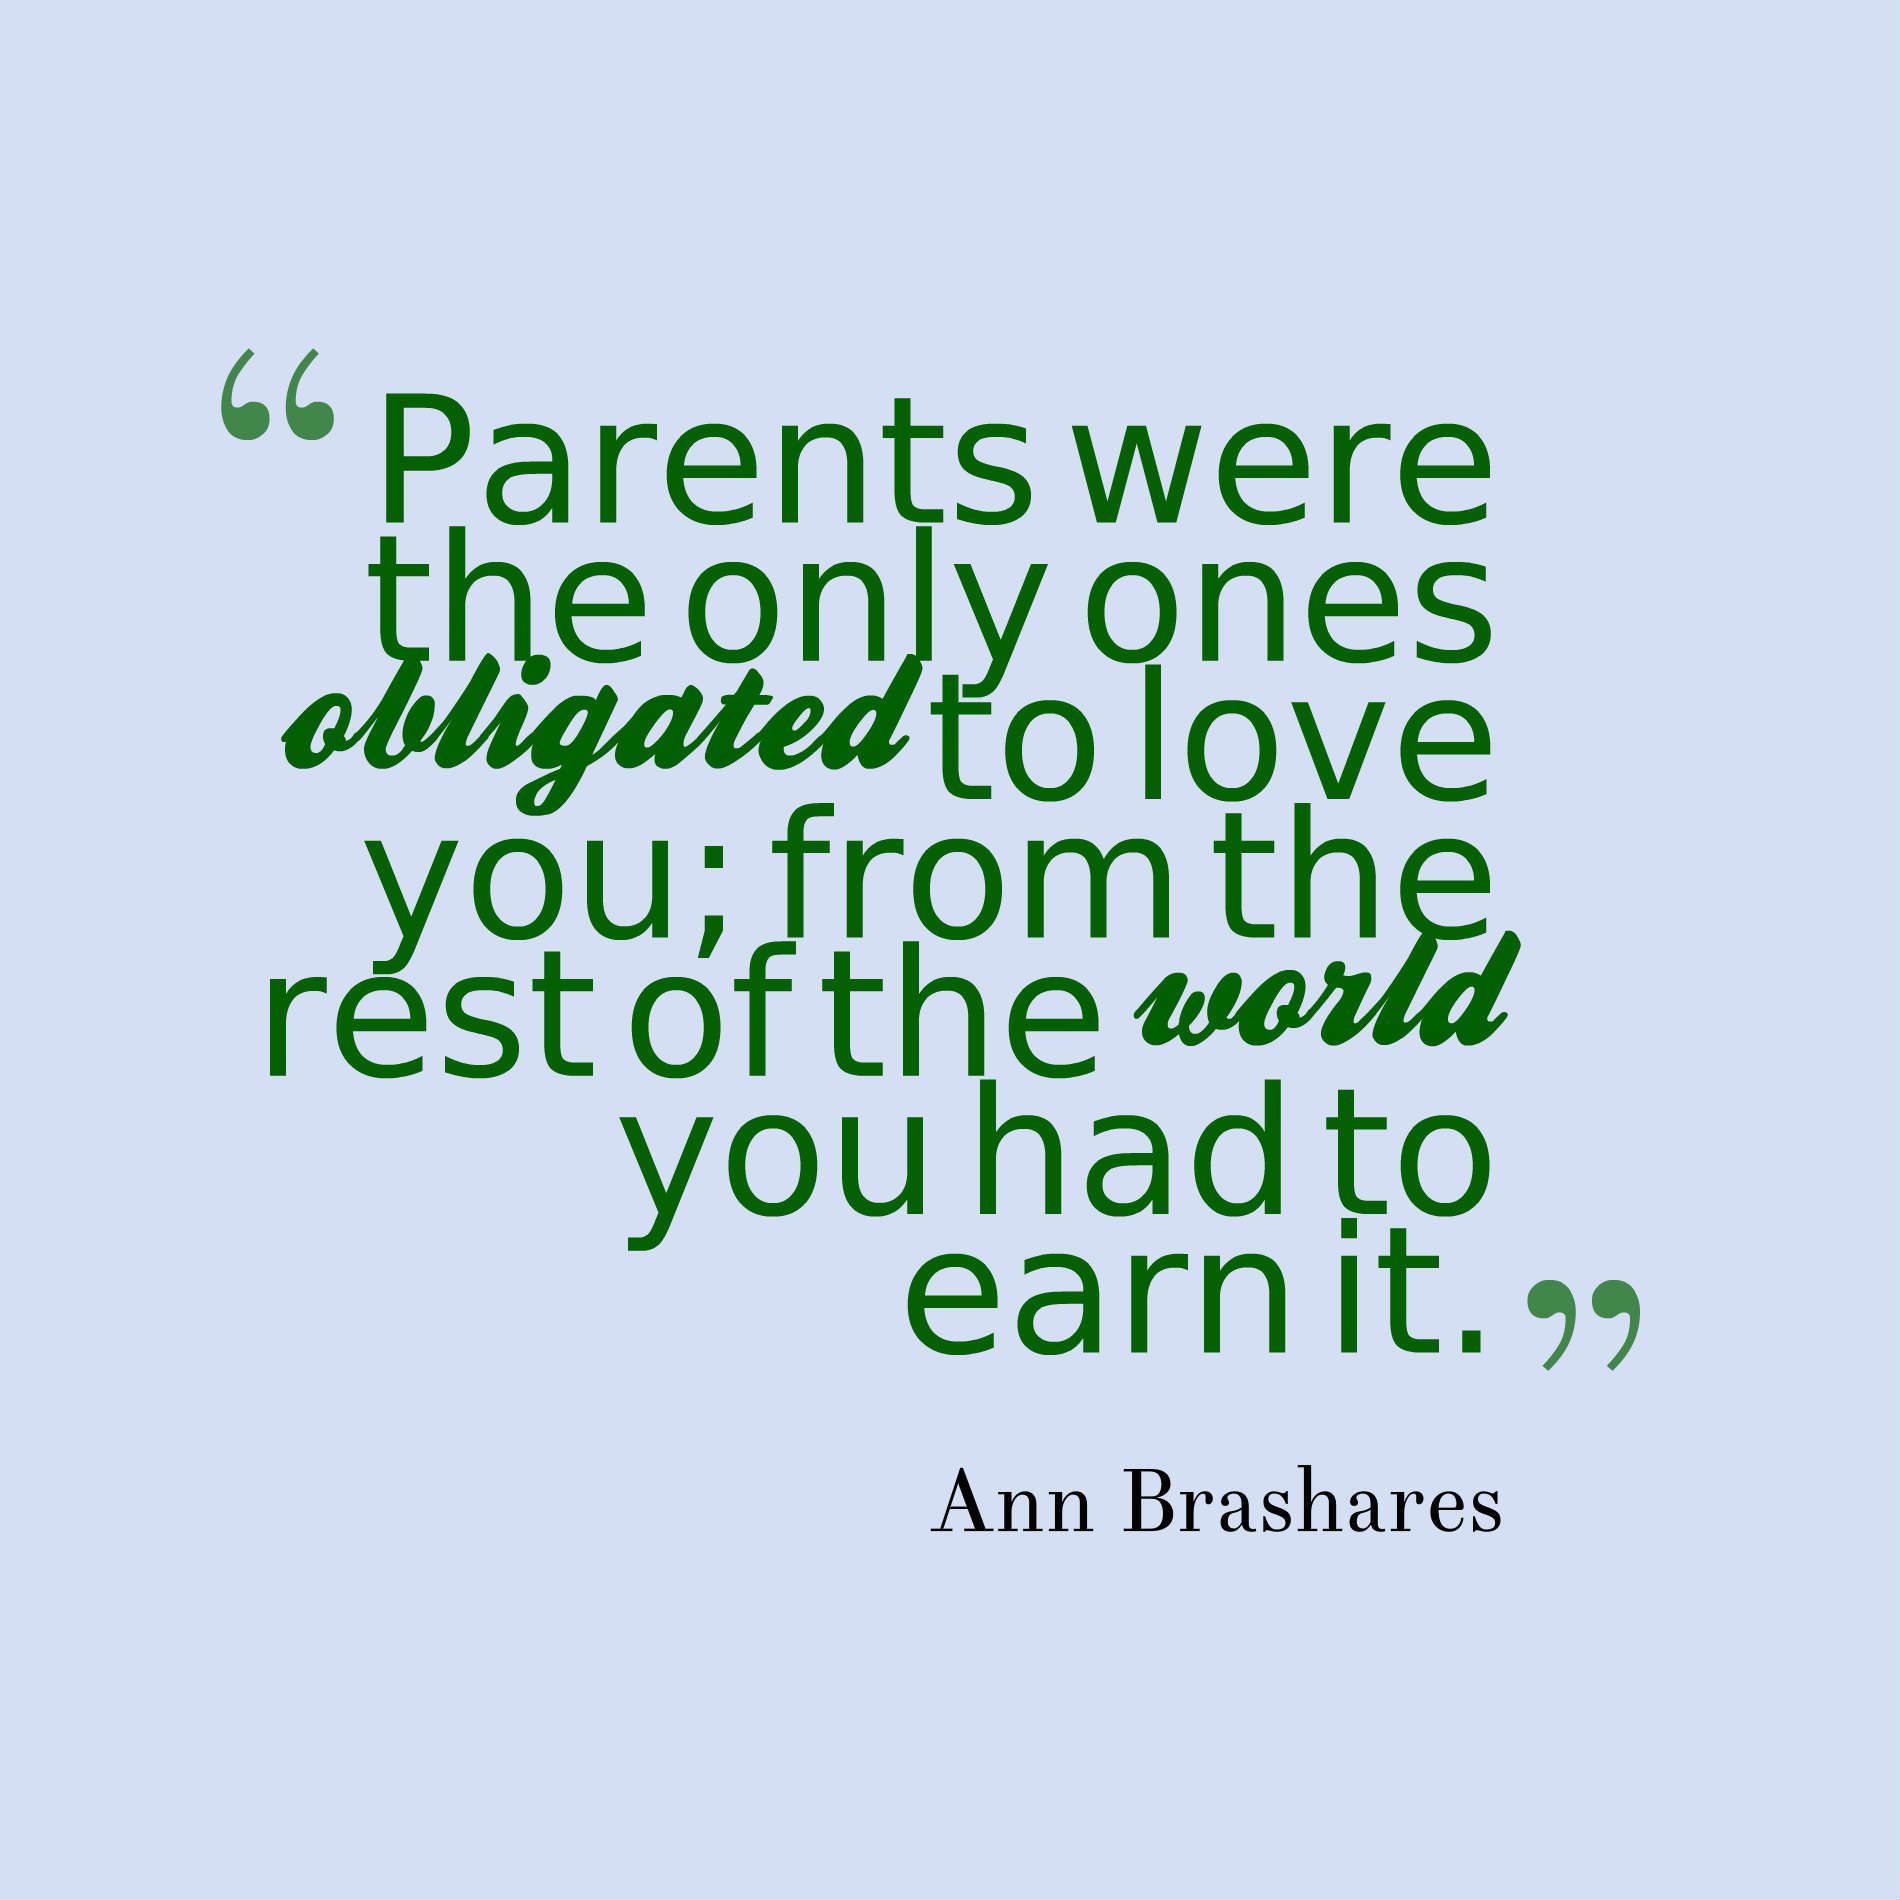 Parents were the only ones obligated to love you; from the rest of the world you had to earn it.